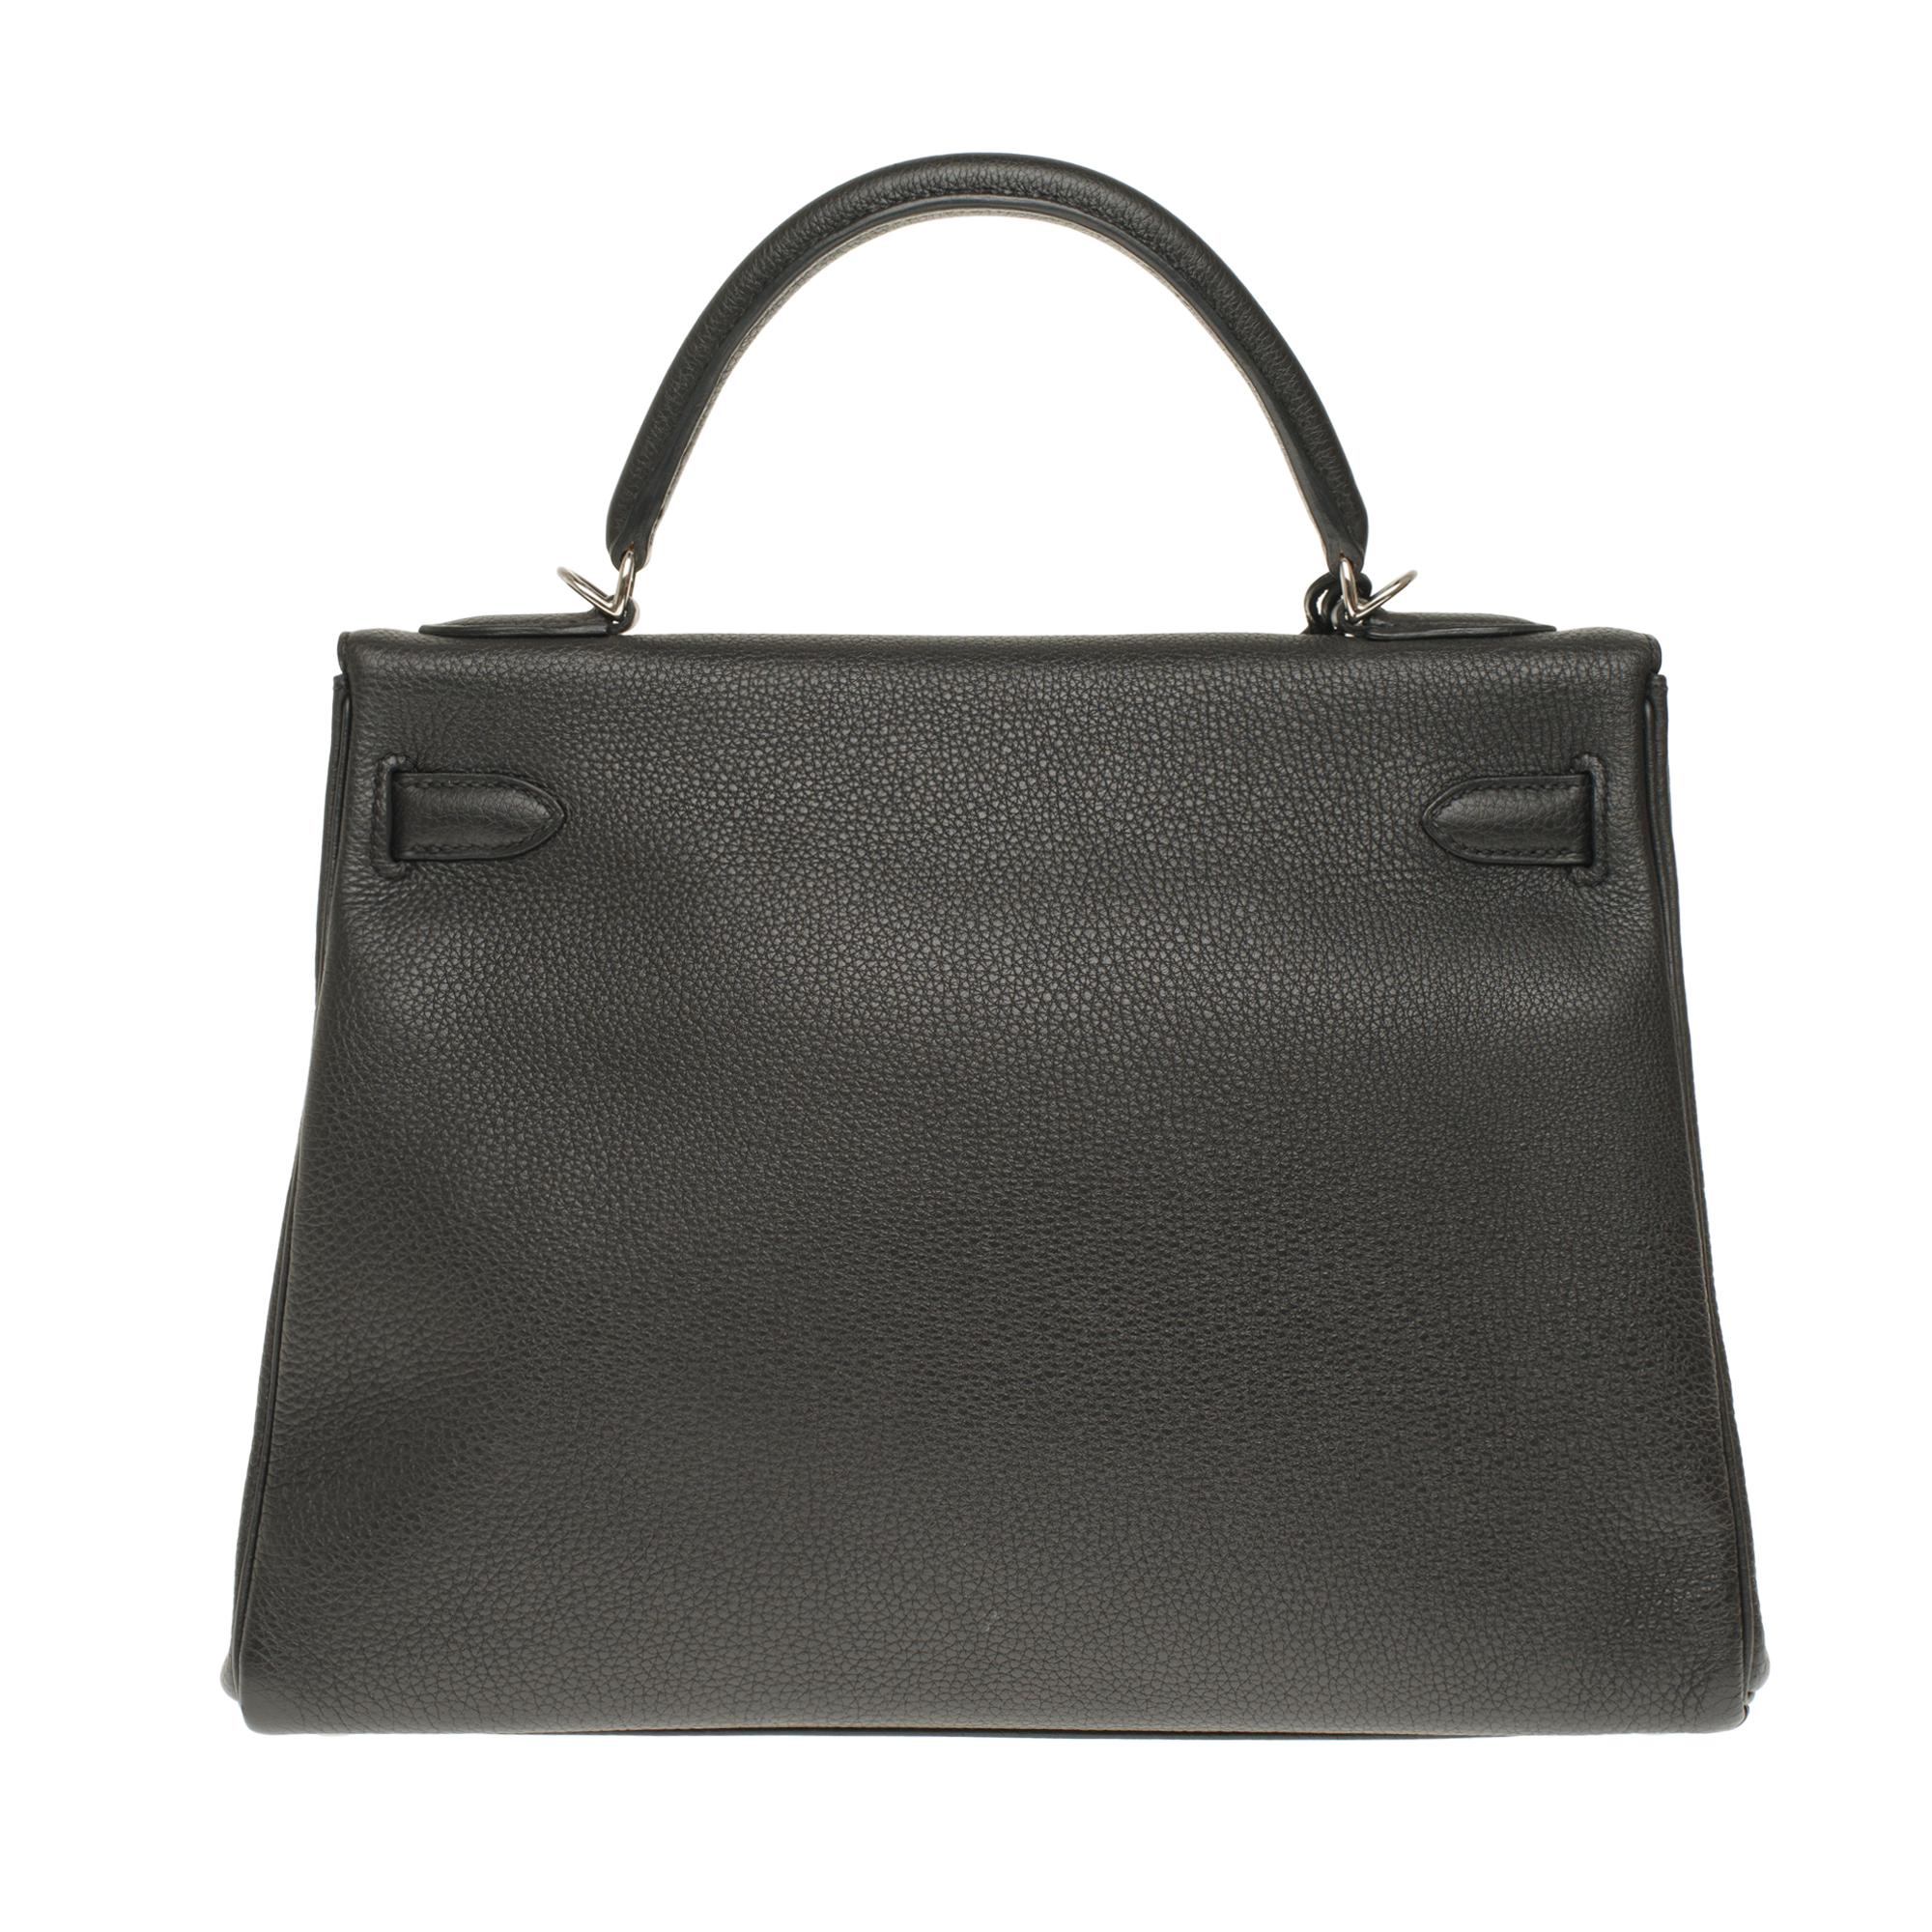 
Splendid 32 cm Hermes Kelly handbag in black Togo, palladium metal trim, black leather handle, removable shoulder strap in black togo leather allowing a hand or shoulder support.

Closure by flap.
Lining in black leather, one zipped pocket, two